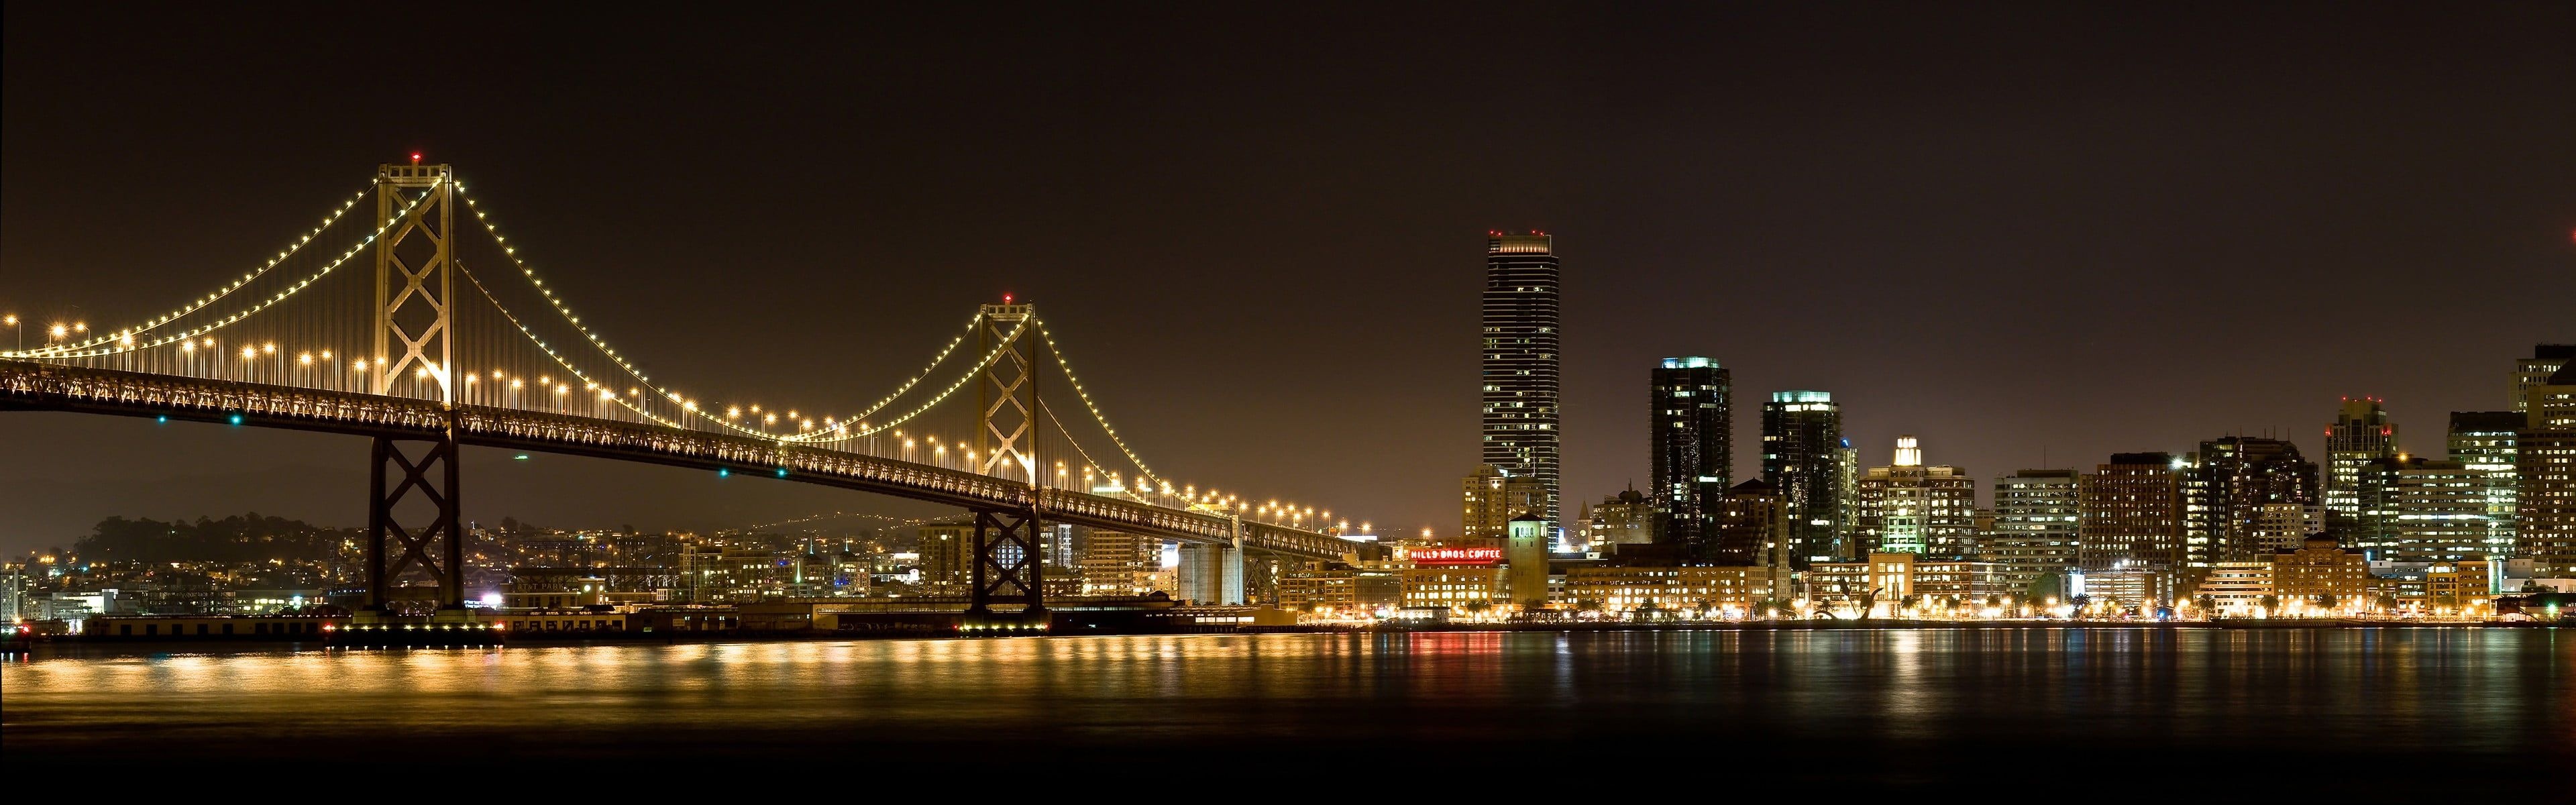 Bridge: The Brooklyn Span, The southernmost of the four toll-free vehicular spans connecting Manhattan and Long Island. 3840x1200 Dual Screen Wallpaper.